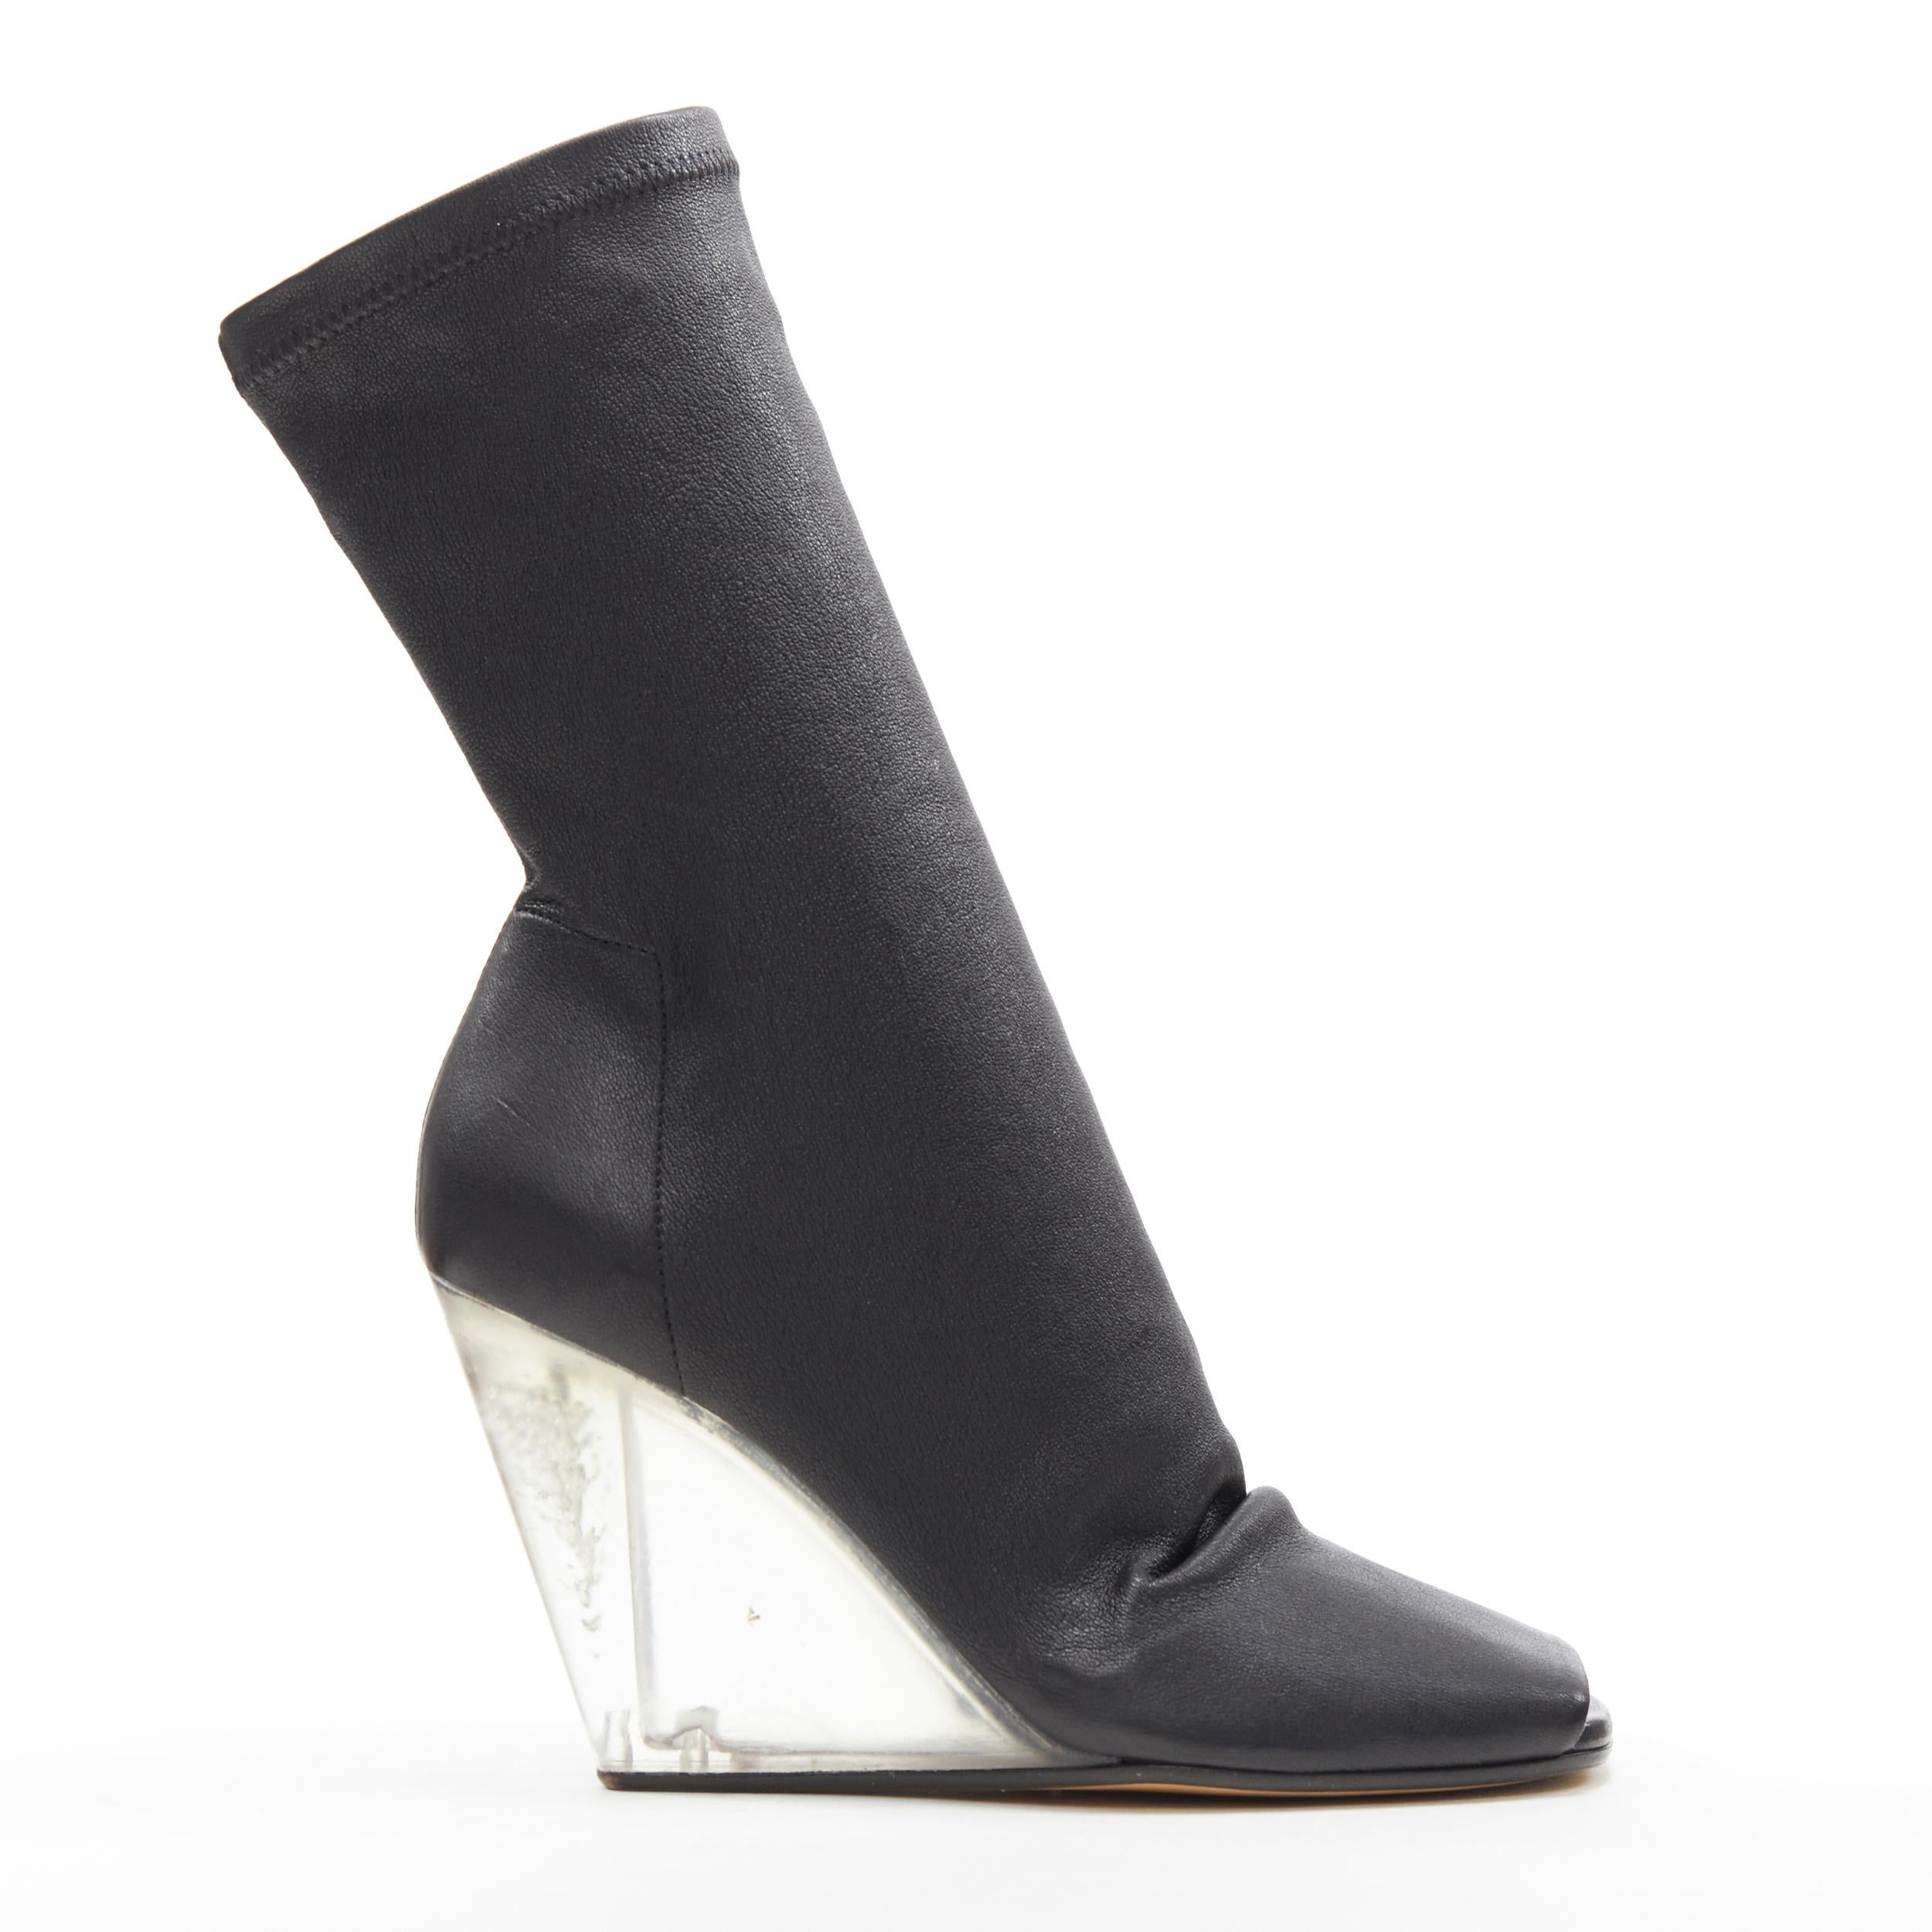 new RICK OWENS black stretch leather square slit toe clear wedge sock boot EU37
Brand: Rick Owens
Designer: Rick Owens
Collection: Fall Winter 2018
Model Name / Style: Leather sock boot
Material: Leather
Color: Black
Pattern: Solid
Closure: Pull